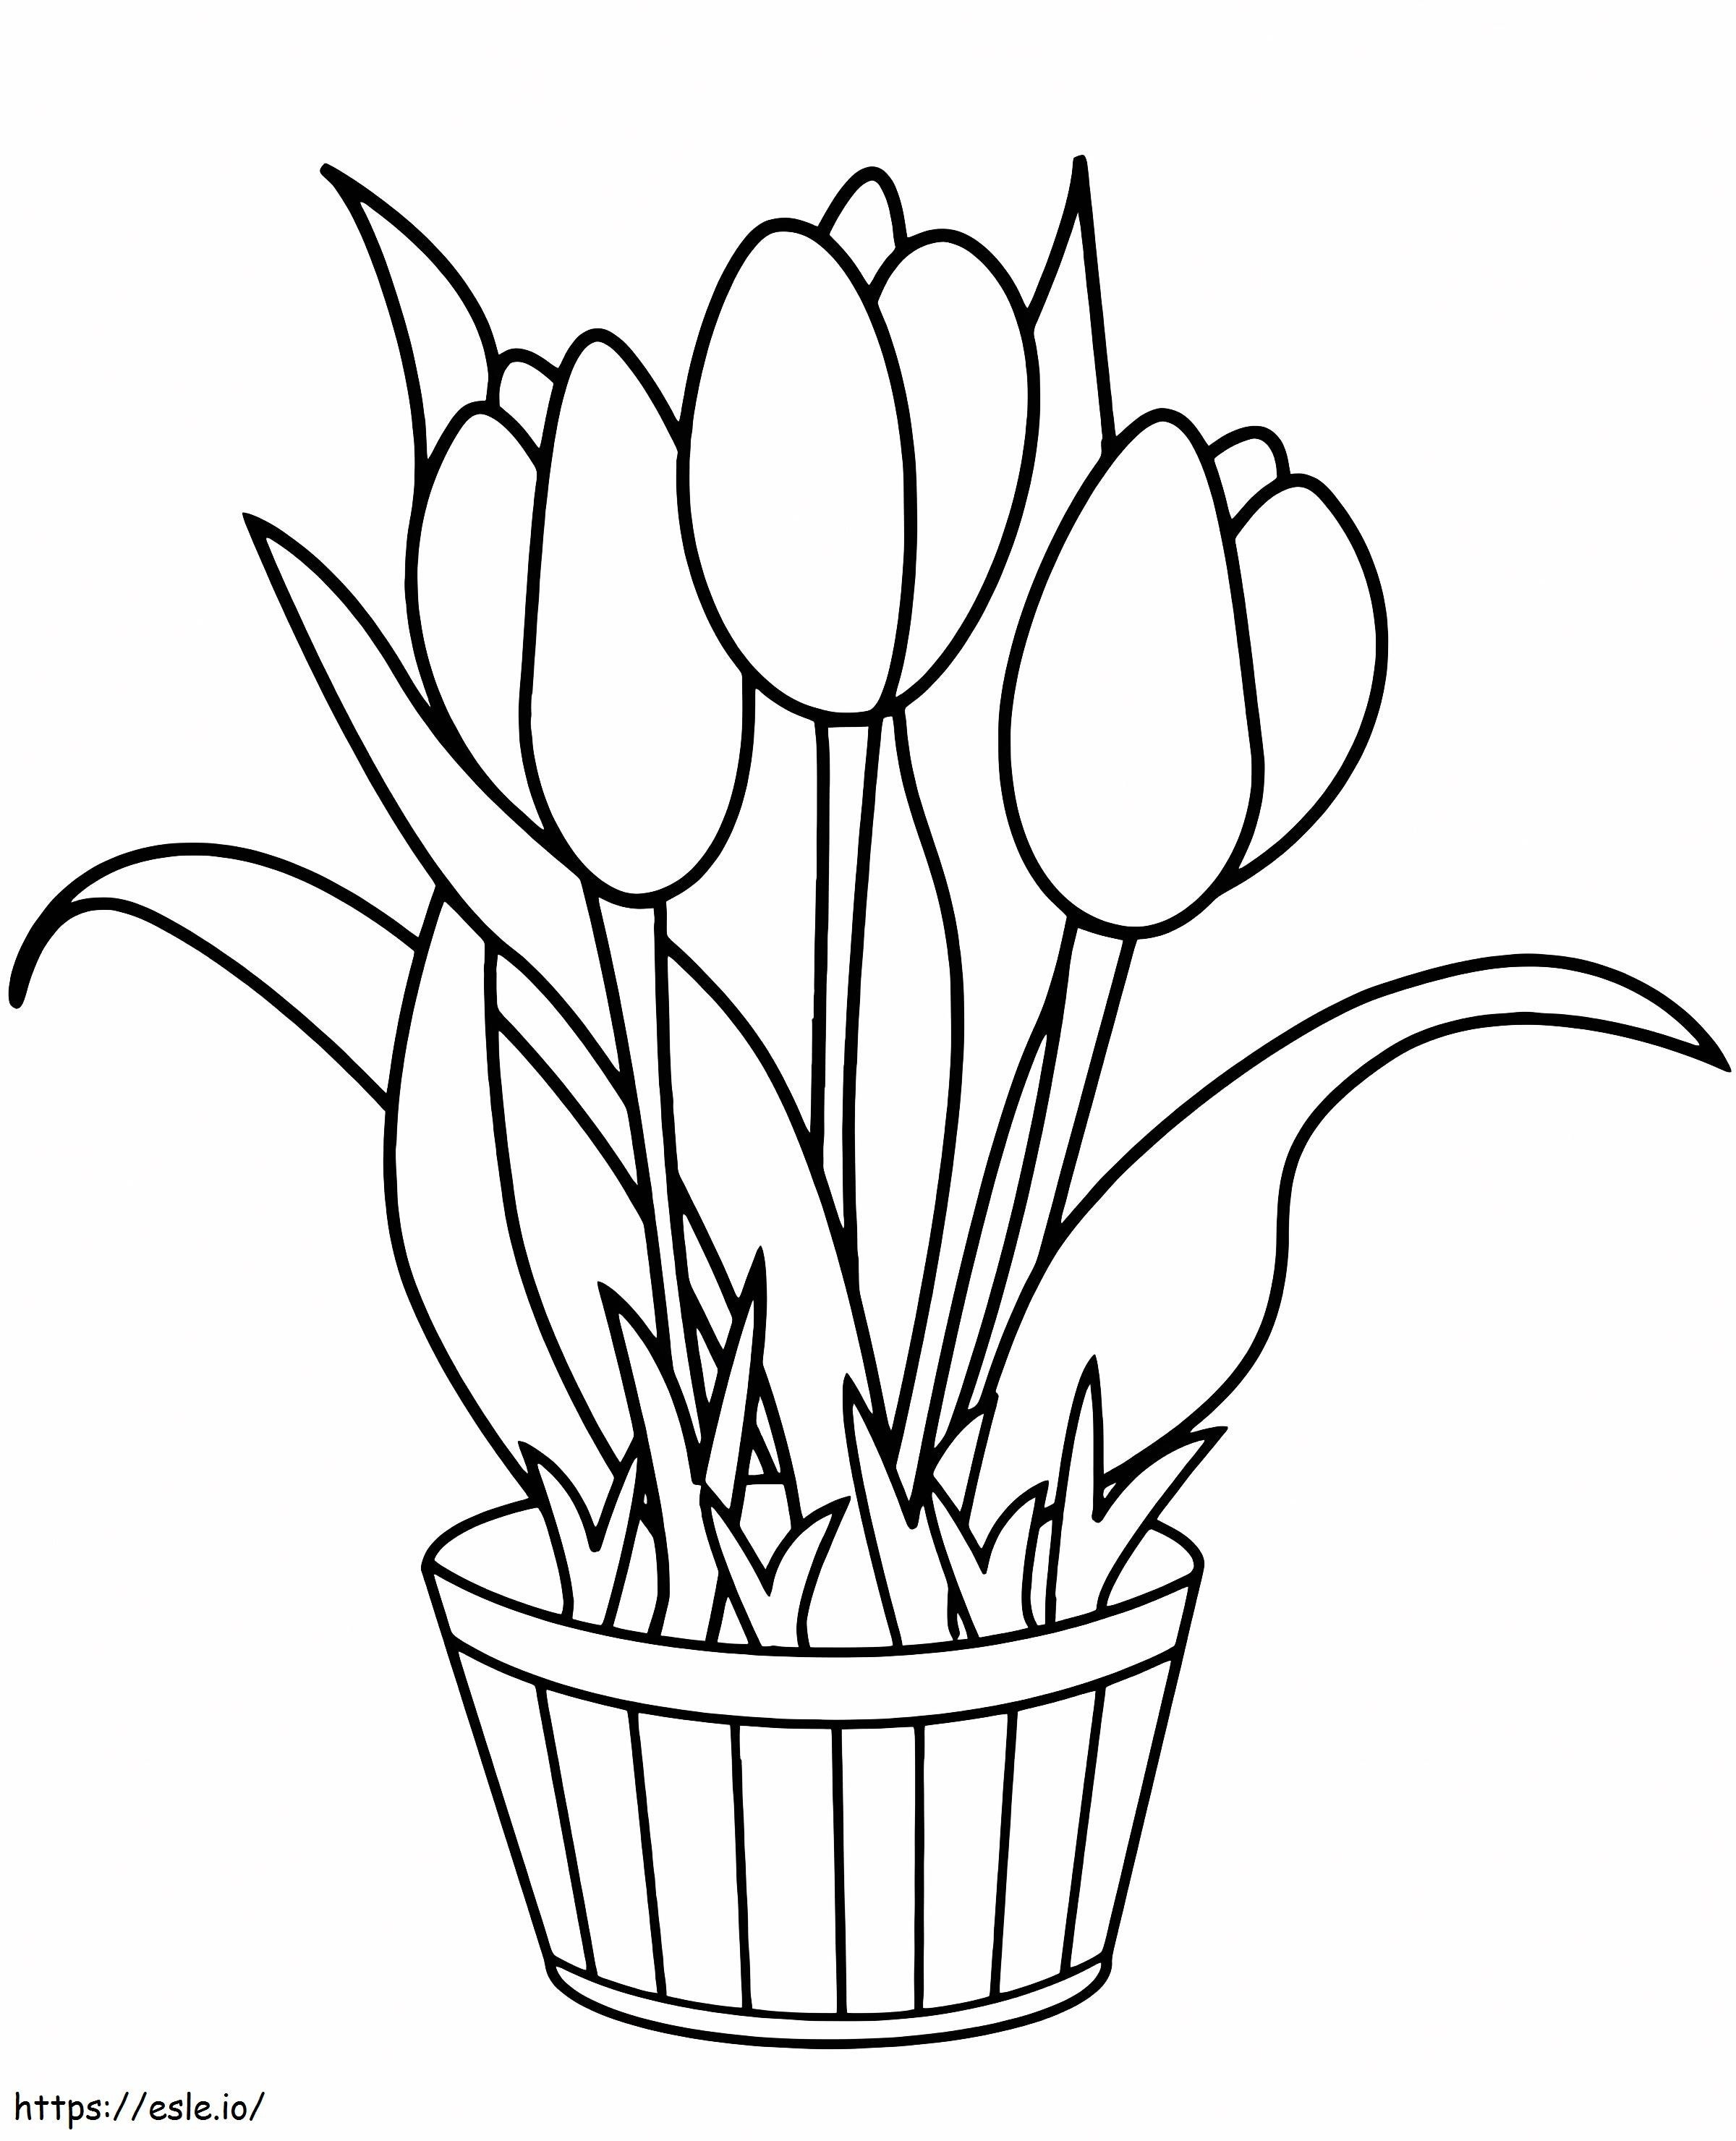 Flowerpot With Tulips coloring page